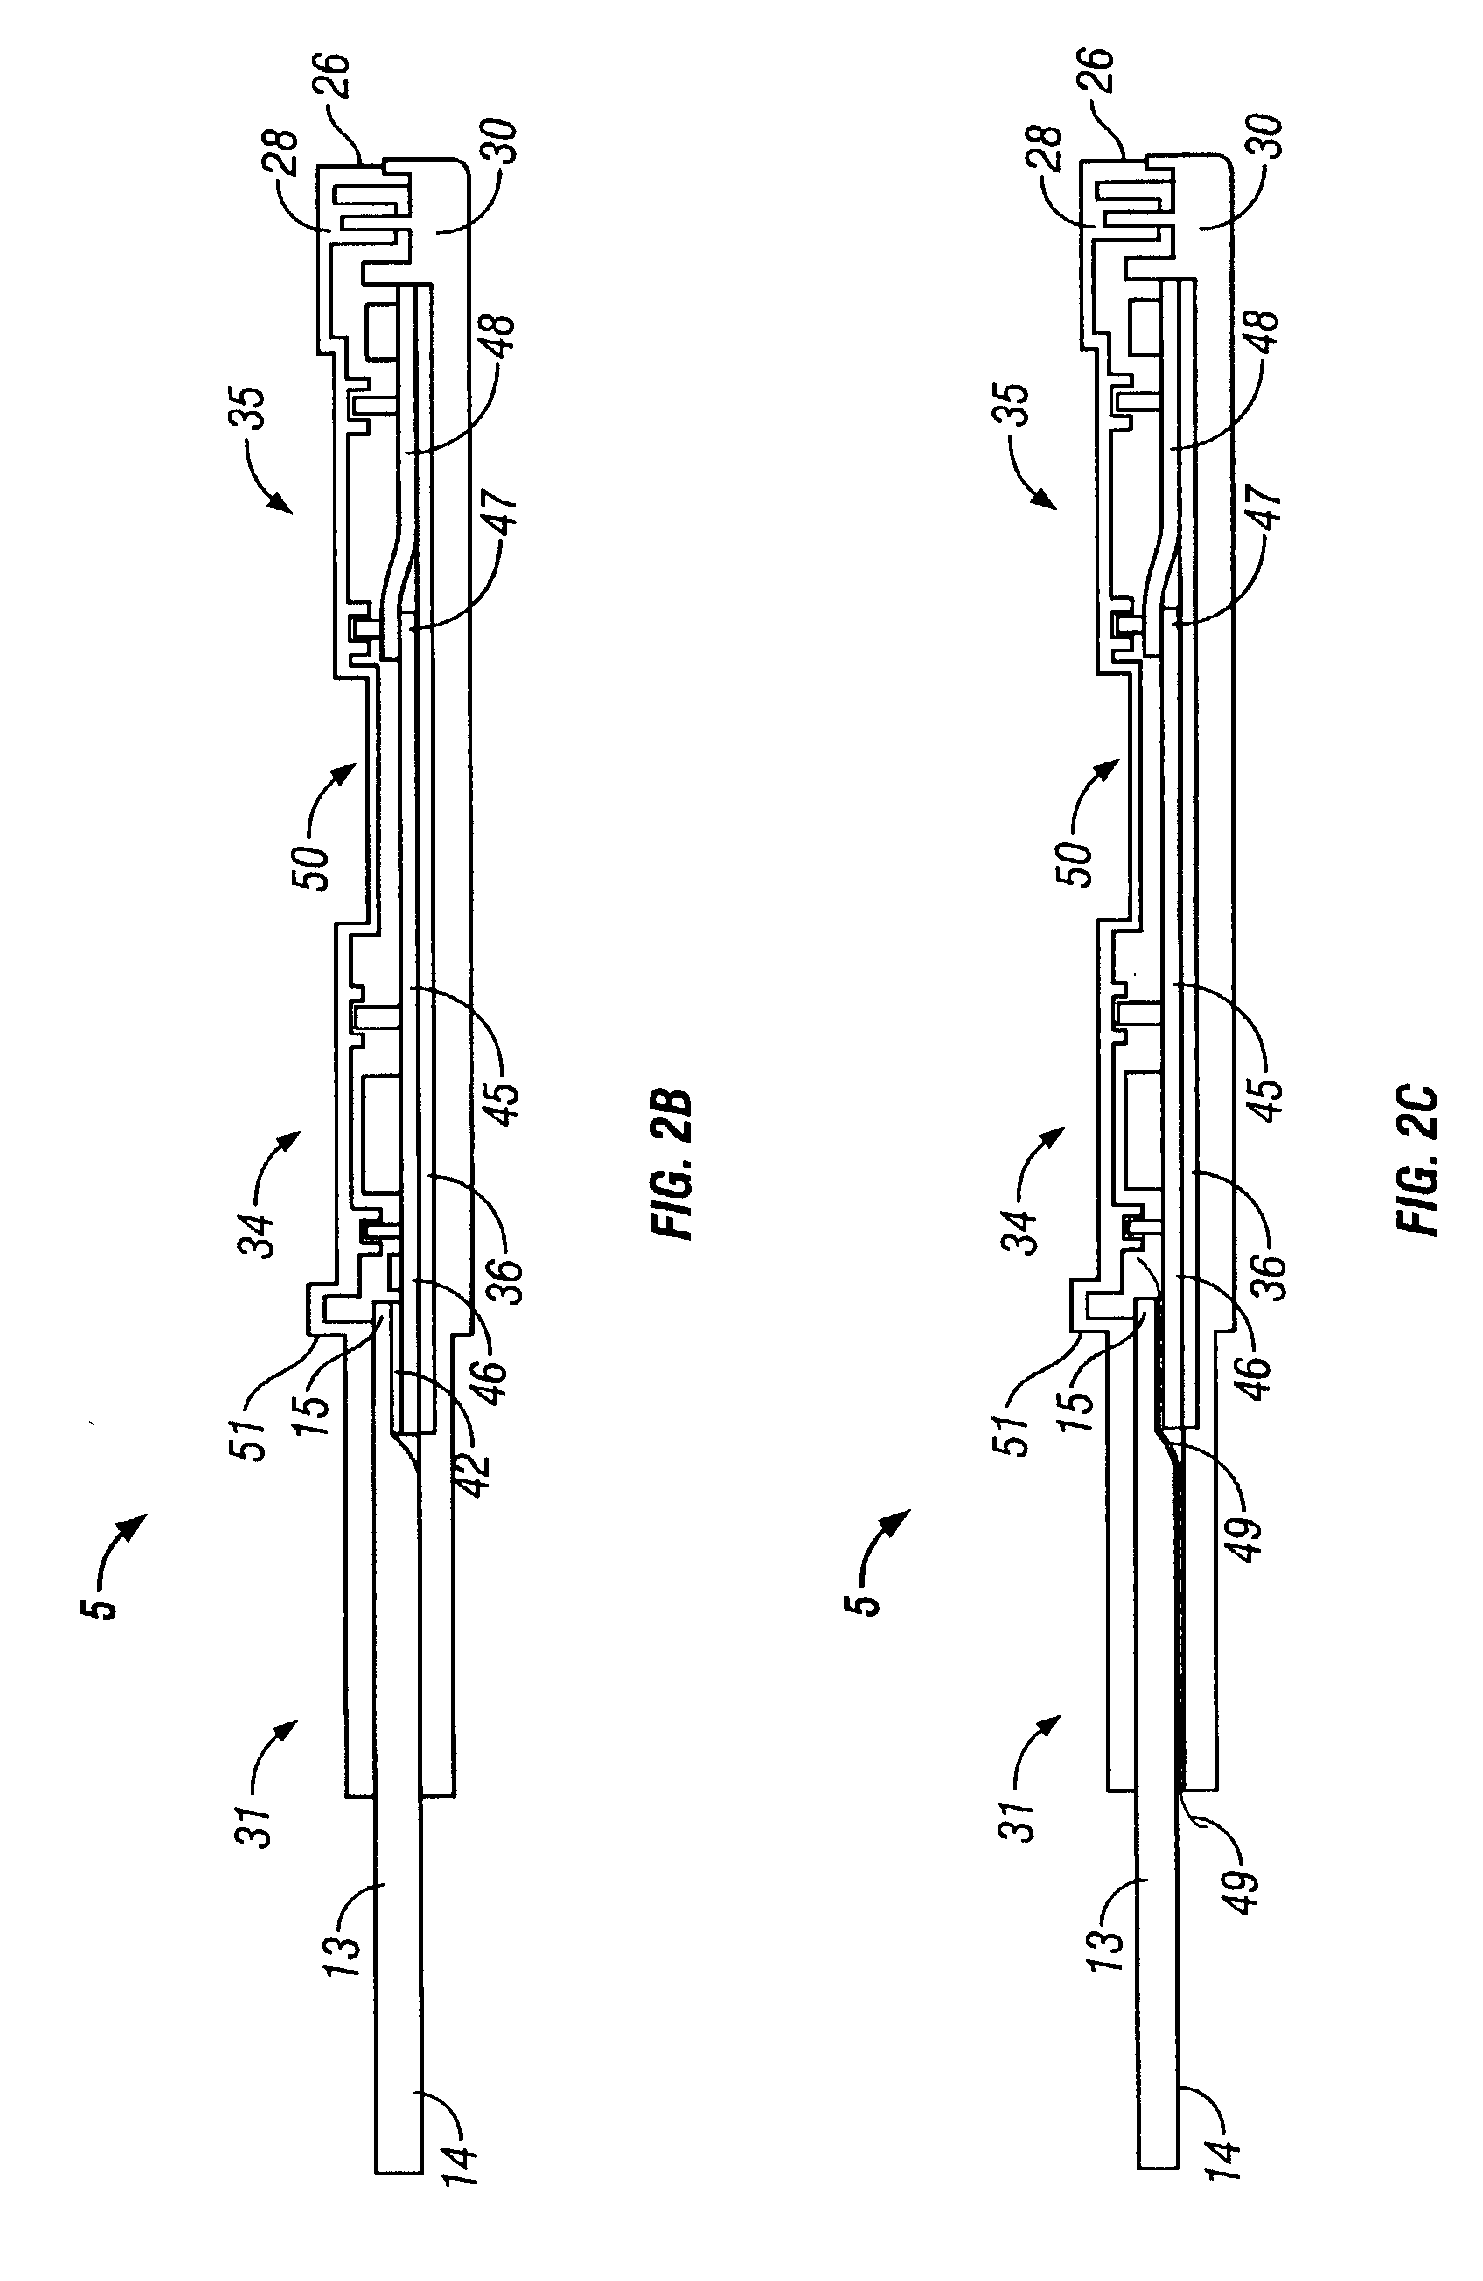 Integrated confirmation sample in a body fluid test device and method of using